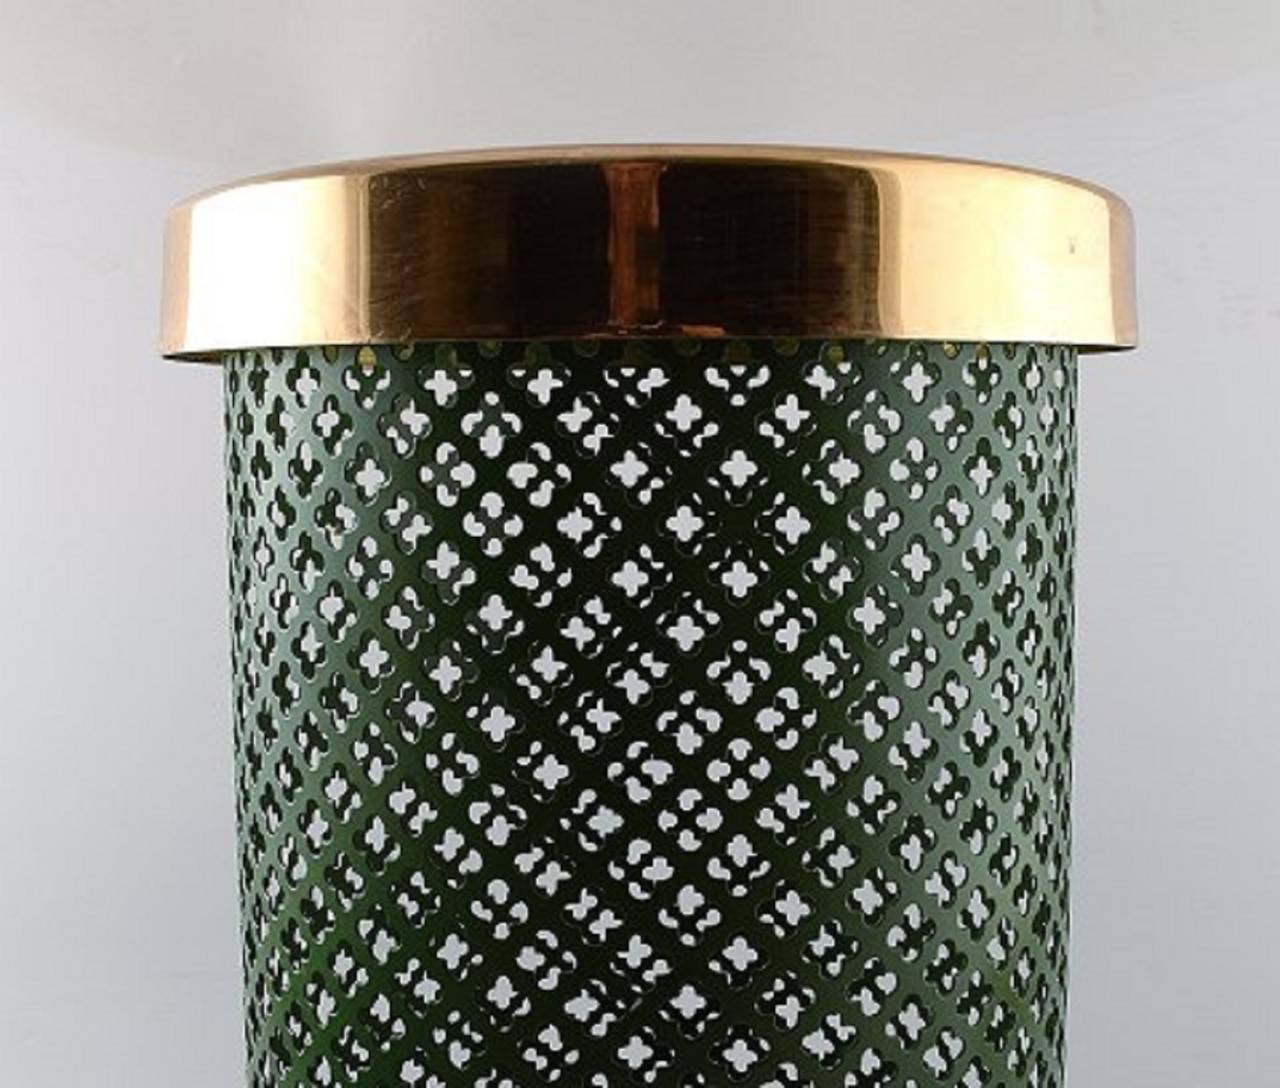 Josef Frank wastebasket in green metal with brass top.
In good condition.
Measures 38.5 x 25.5 cm.